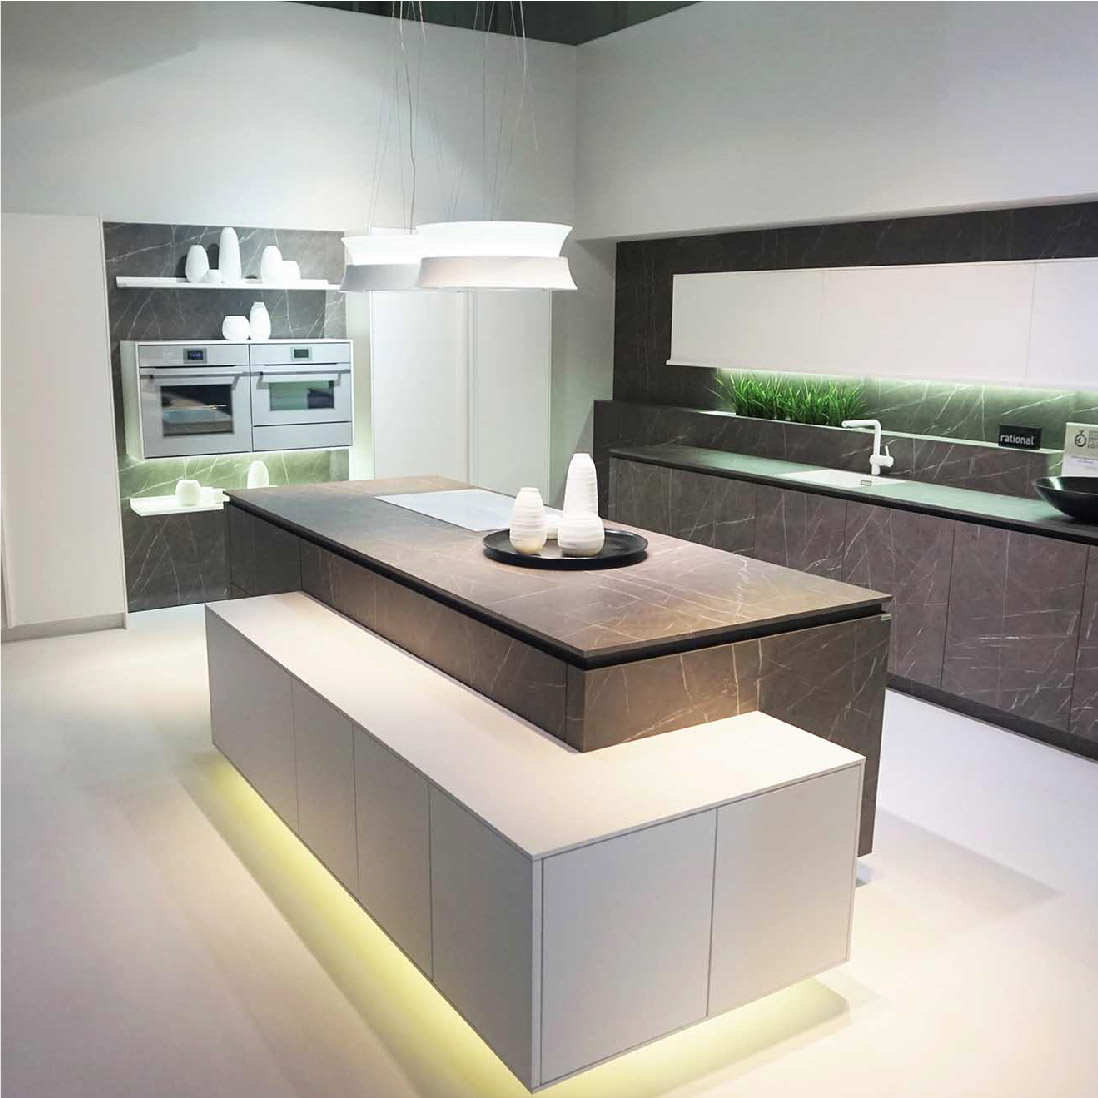 Modern kitchen design featuring sleek surfaces, an island with a waterfall countertop, built-in appliances, and hanging pendant lights with a soft, ambient glow crafted by a leading Design Agency UK.